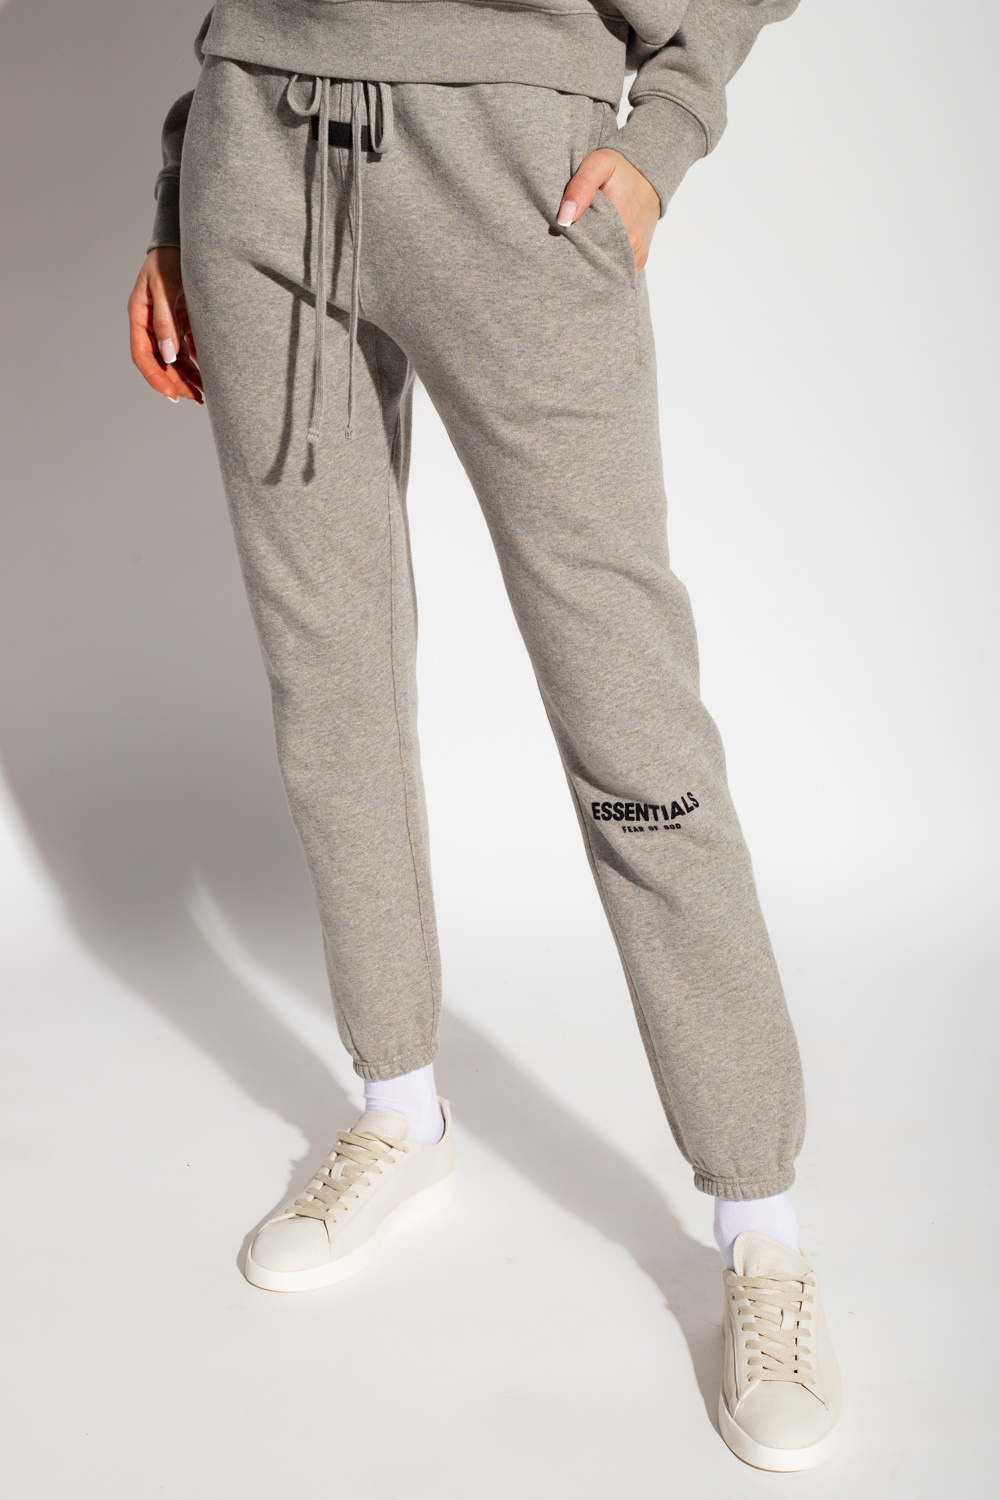 Fear Of God Essentials Sweatpants with logo | Women's Clothing